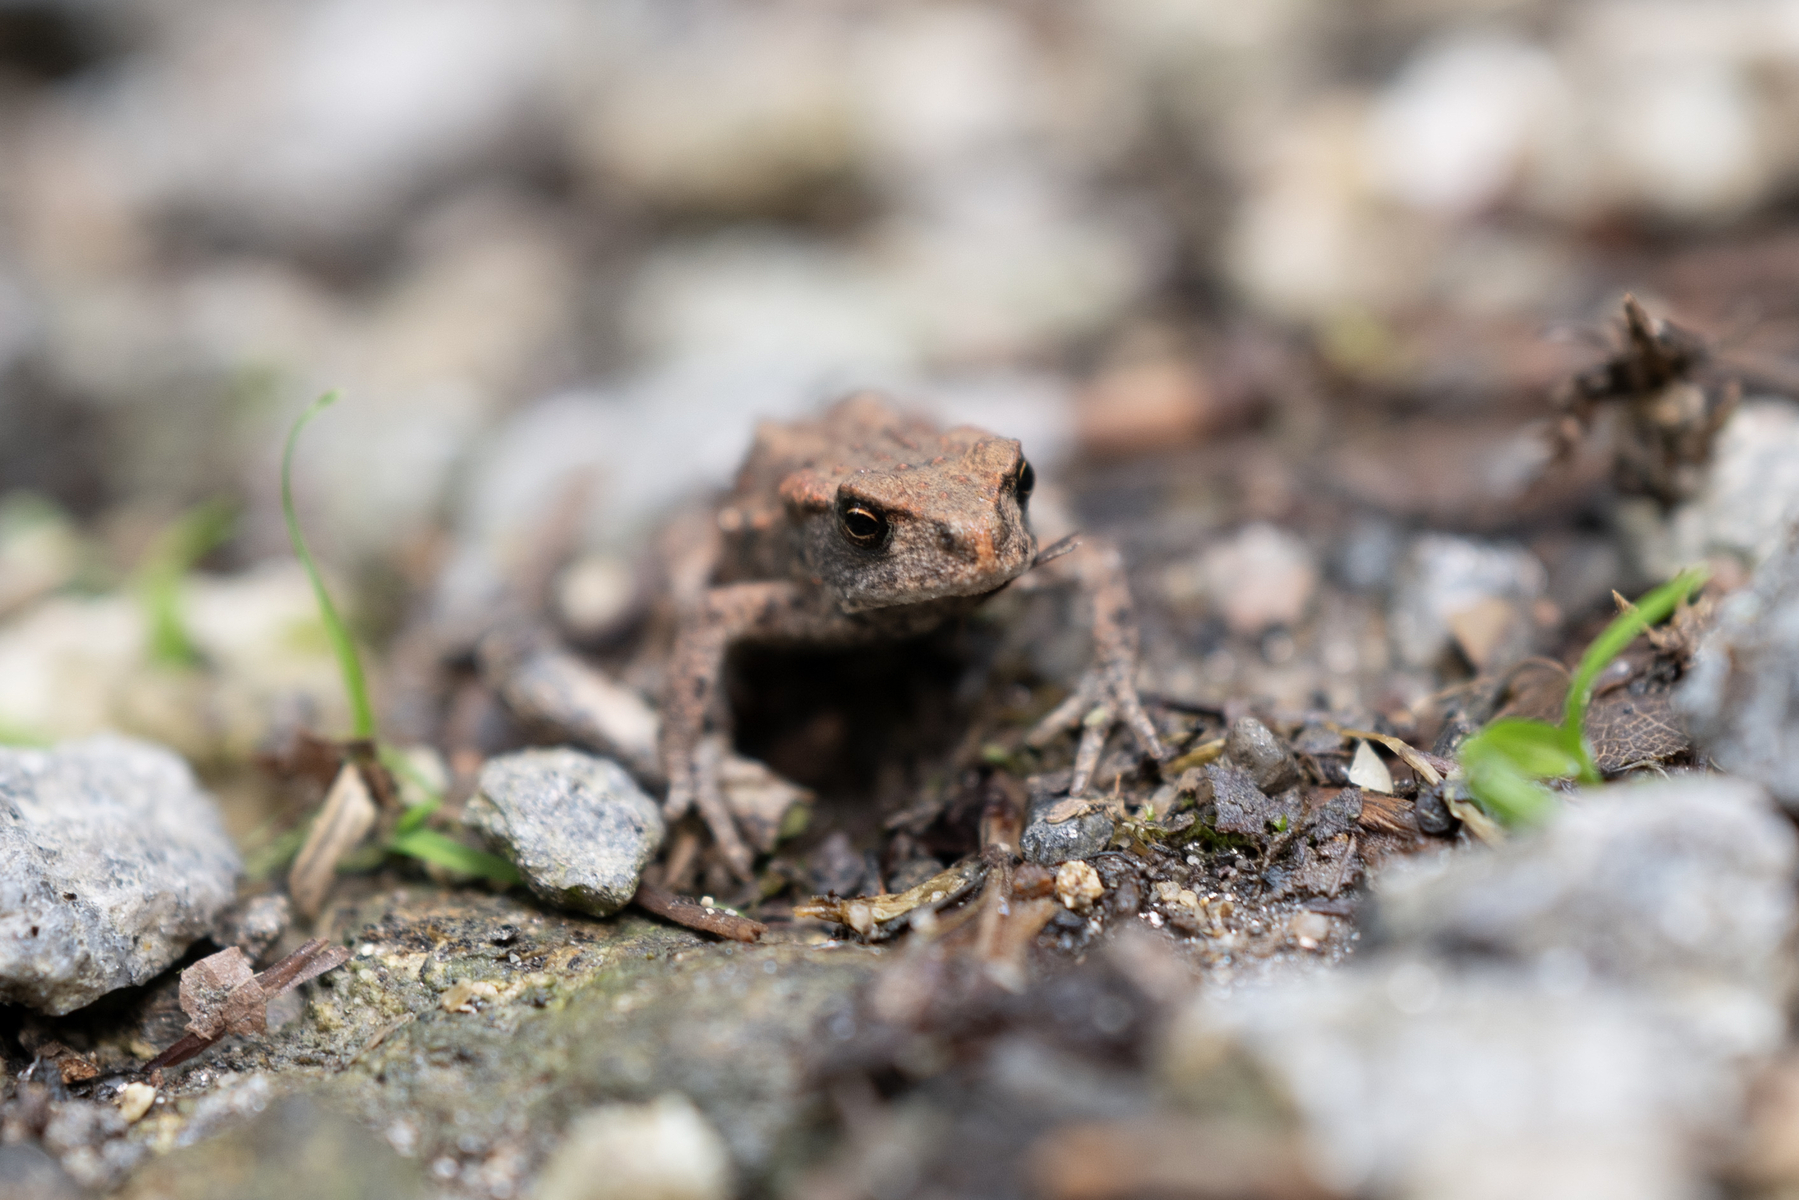 Close-up shot of a small frog seen on a forest path in the Black Forest. The frog‘s colours are various shades of brown. It’s quite small, not even 5 cm in length. The photo was taken with a wide aperture rendering only the head and front legs of the frog in sharp detail. 